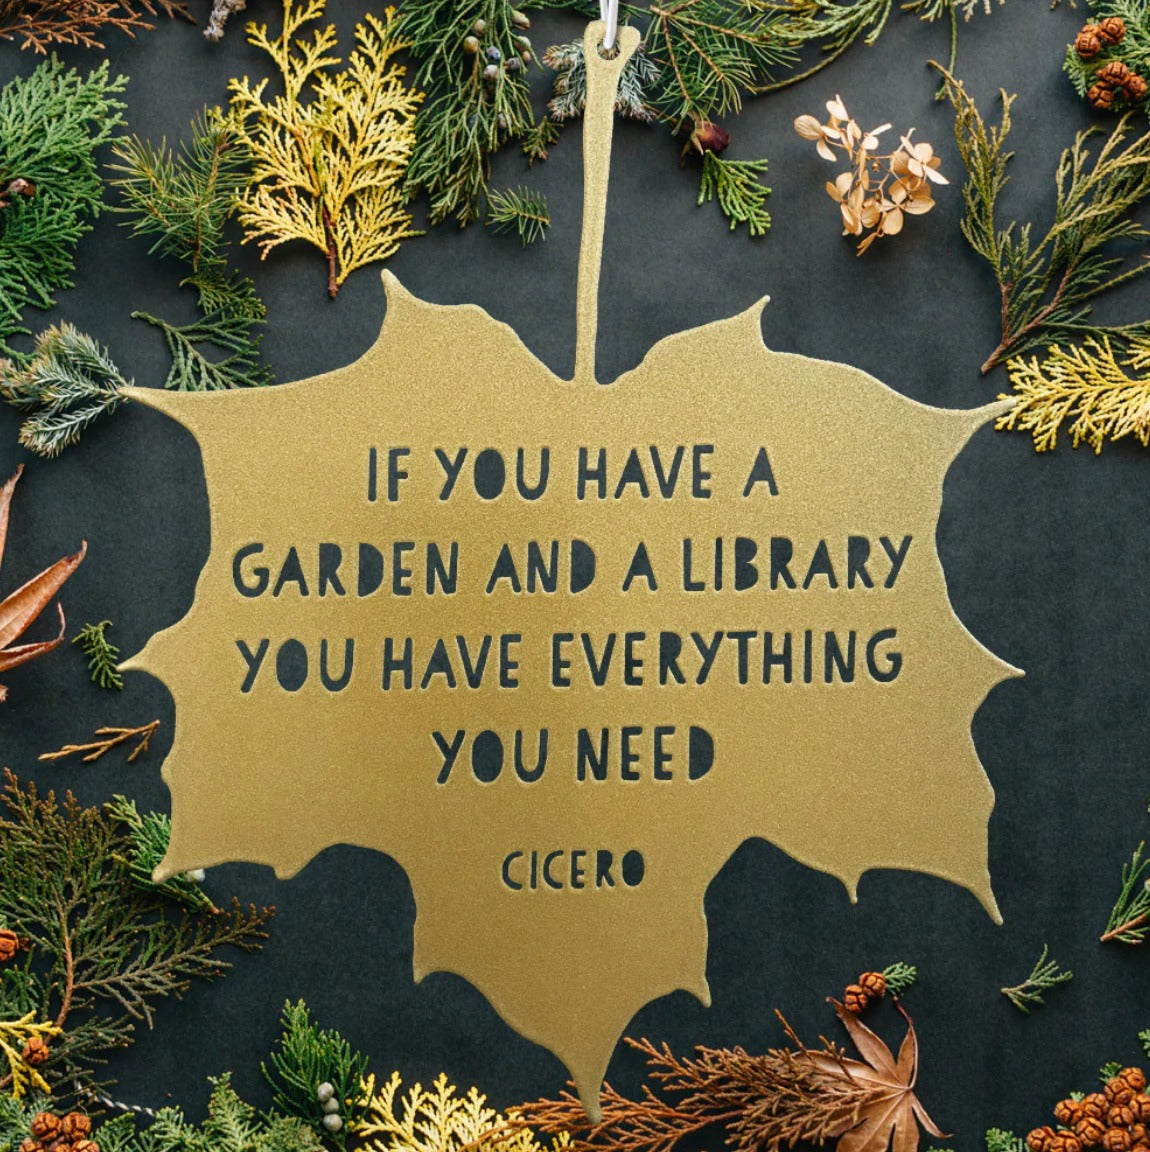 Leaf Quote - If you have a garden and a library you have everything you need - Marcus Tullius Cicero - The Bristol Artisan Handmade Sustainable Gifts and Homewares.